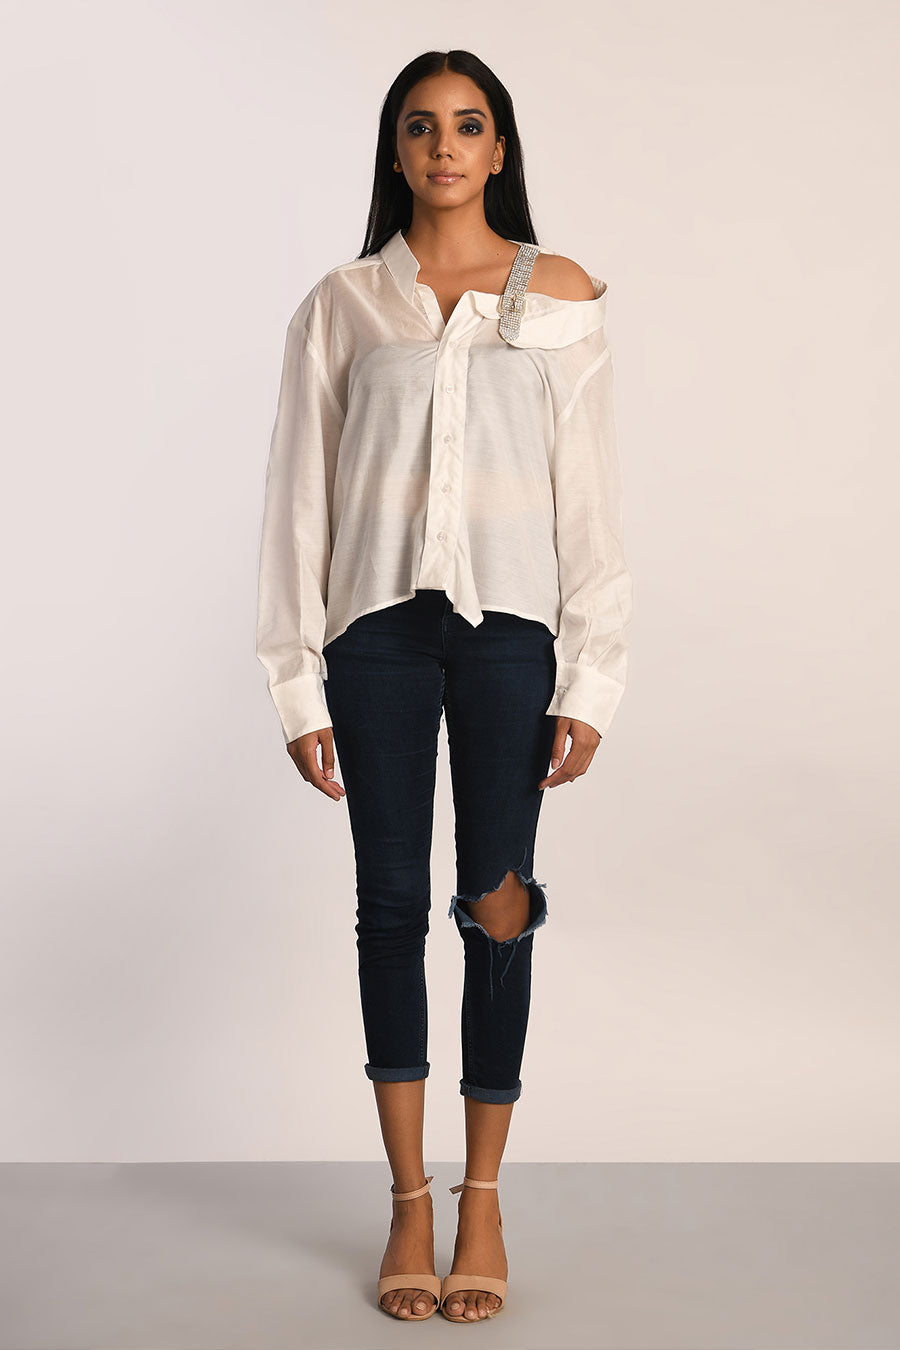 White Shirt With Decatur Detail